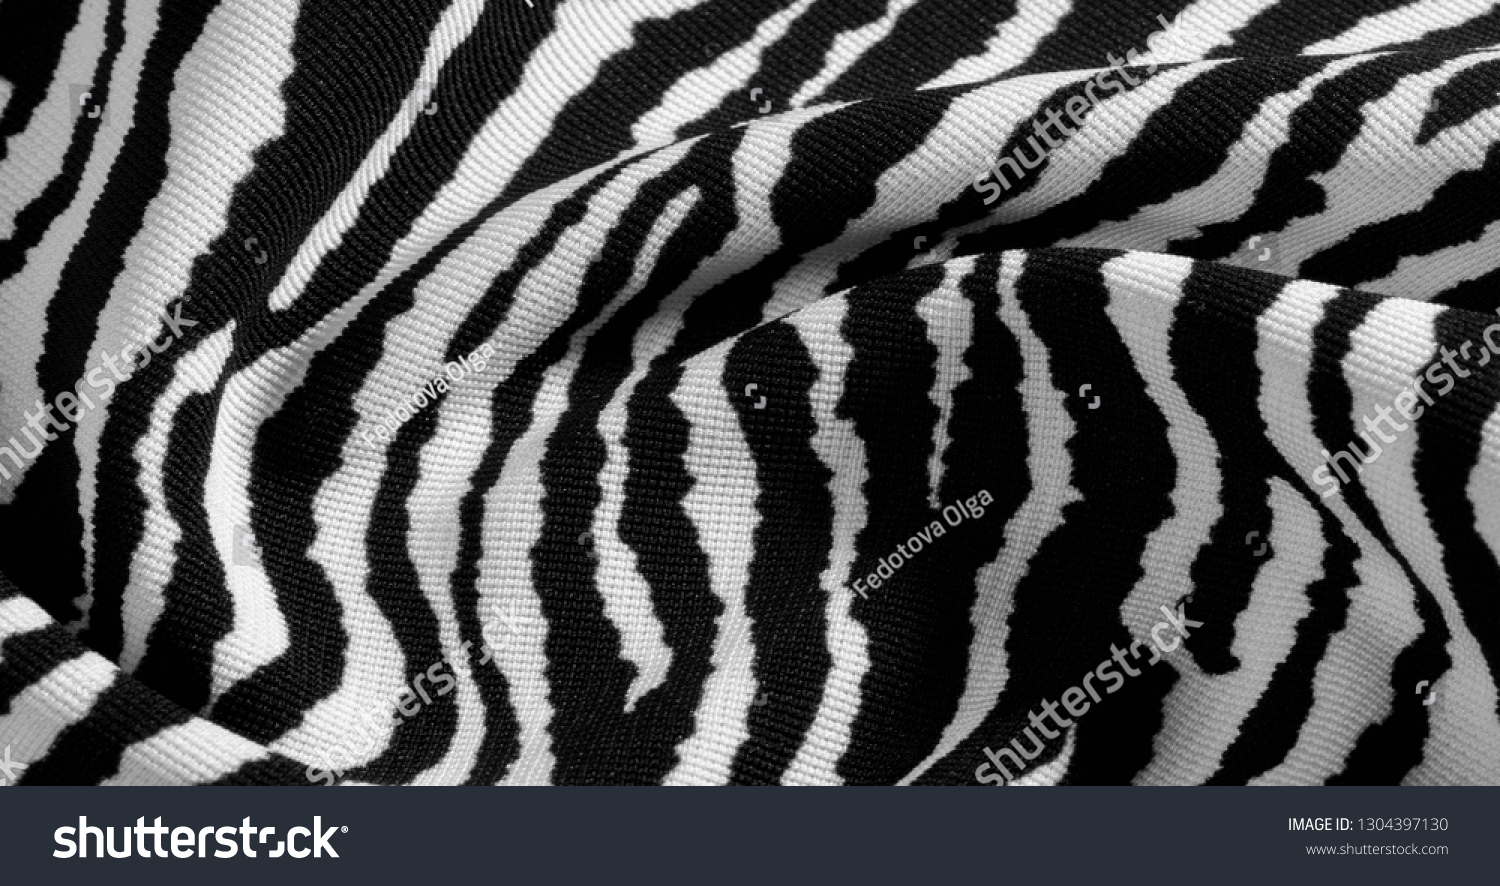 Background, pattern, texture, wallpaper, With the coloring of the animal zebra skin. This extremely soft animal print fabric is perfect for creating your projects, baby accessories, and more! #1304397130